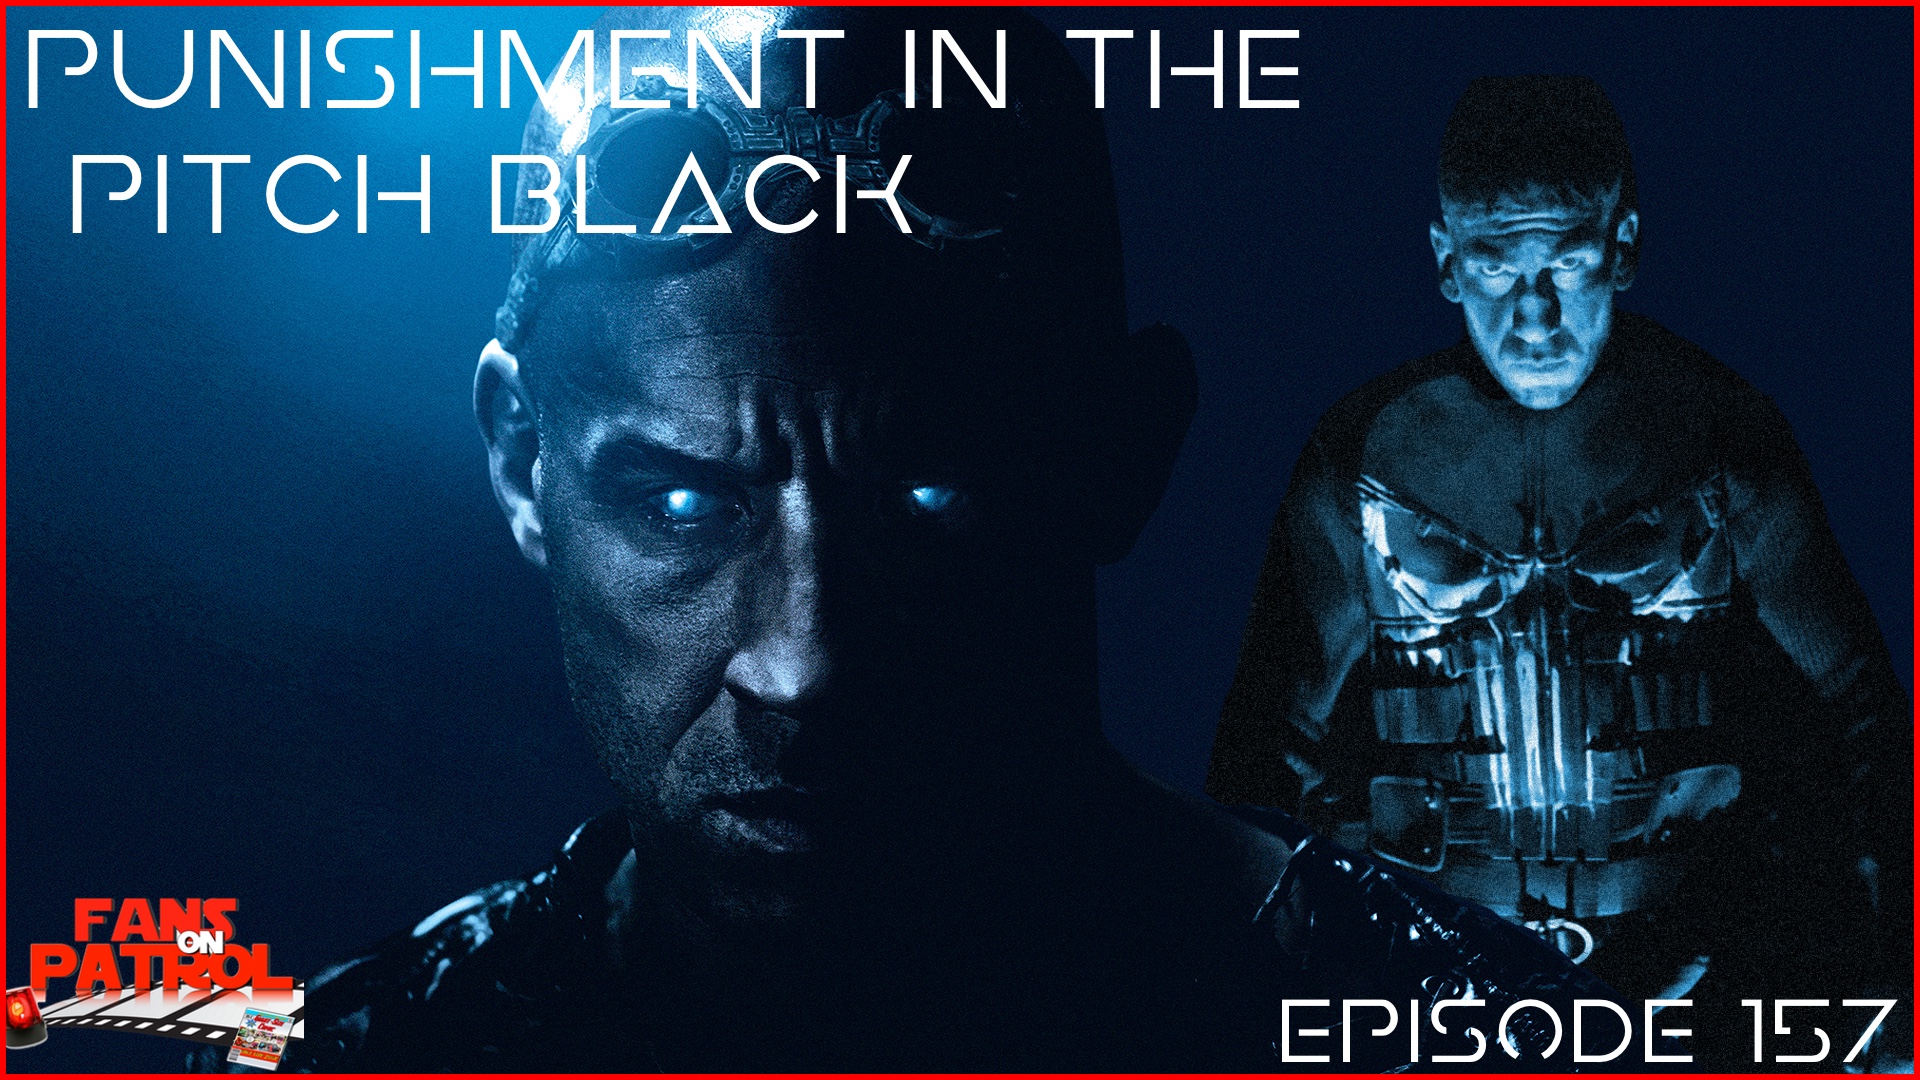 Punishment in the Pitch Black Episode 157